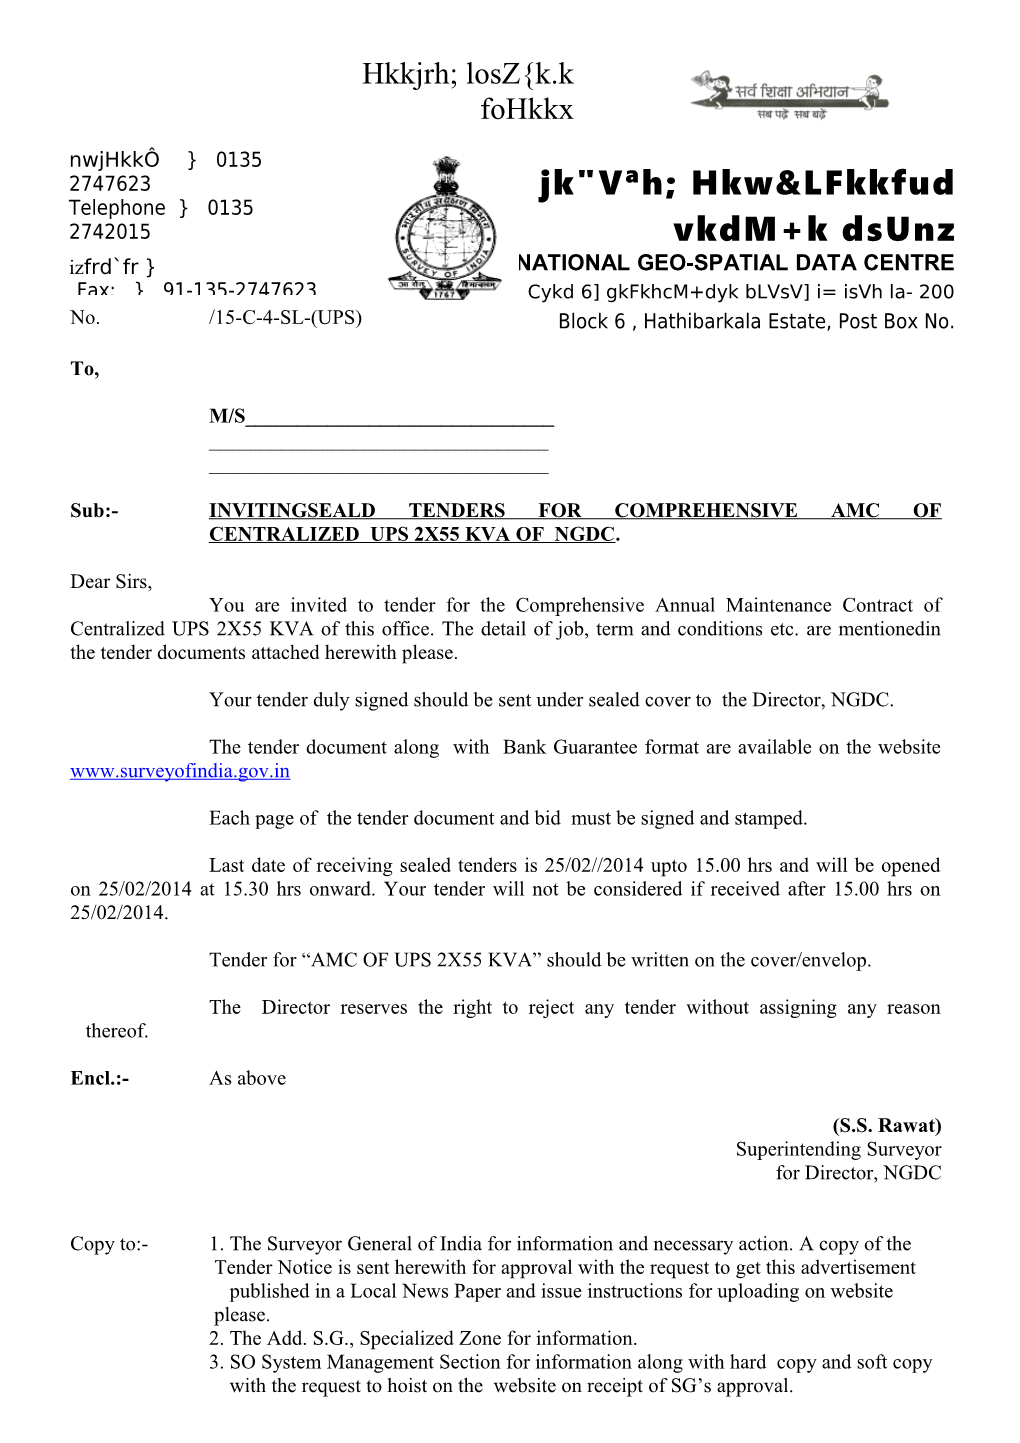 Sub:-INVITINGSEALD TENDERS for COMPREHENSIVE AMC of CENTRALIZED UPS 2X55 KVA of NGDC